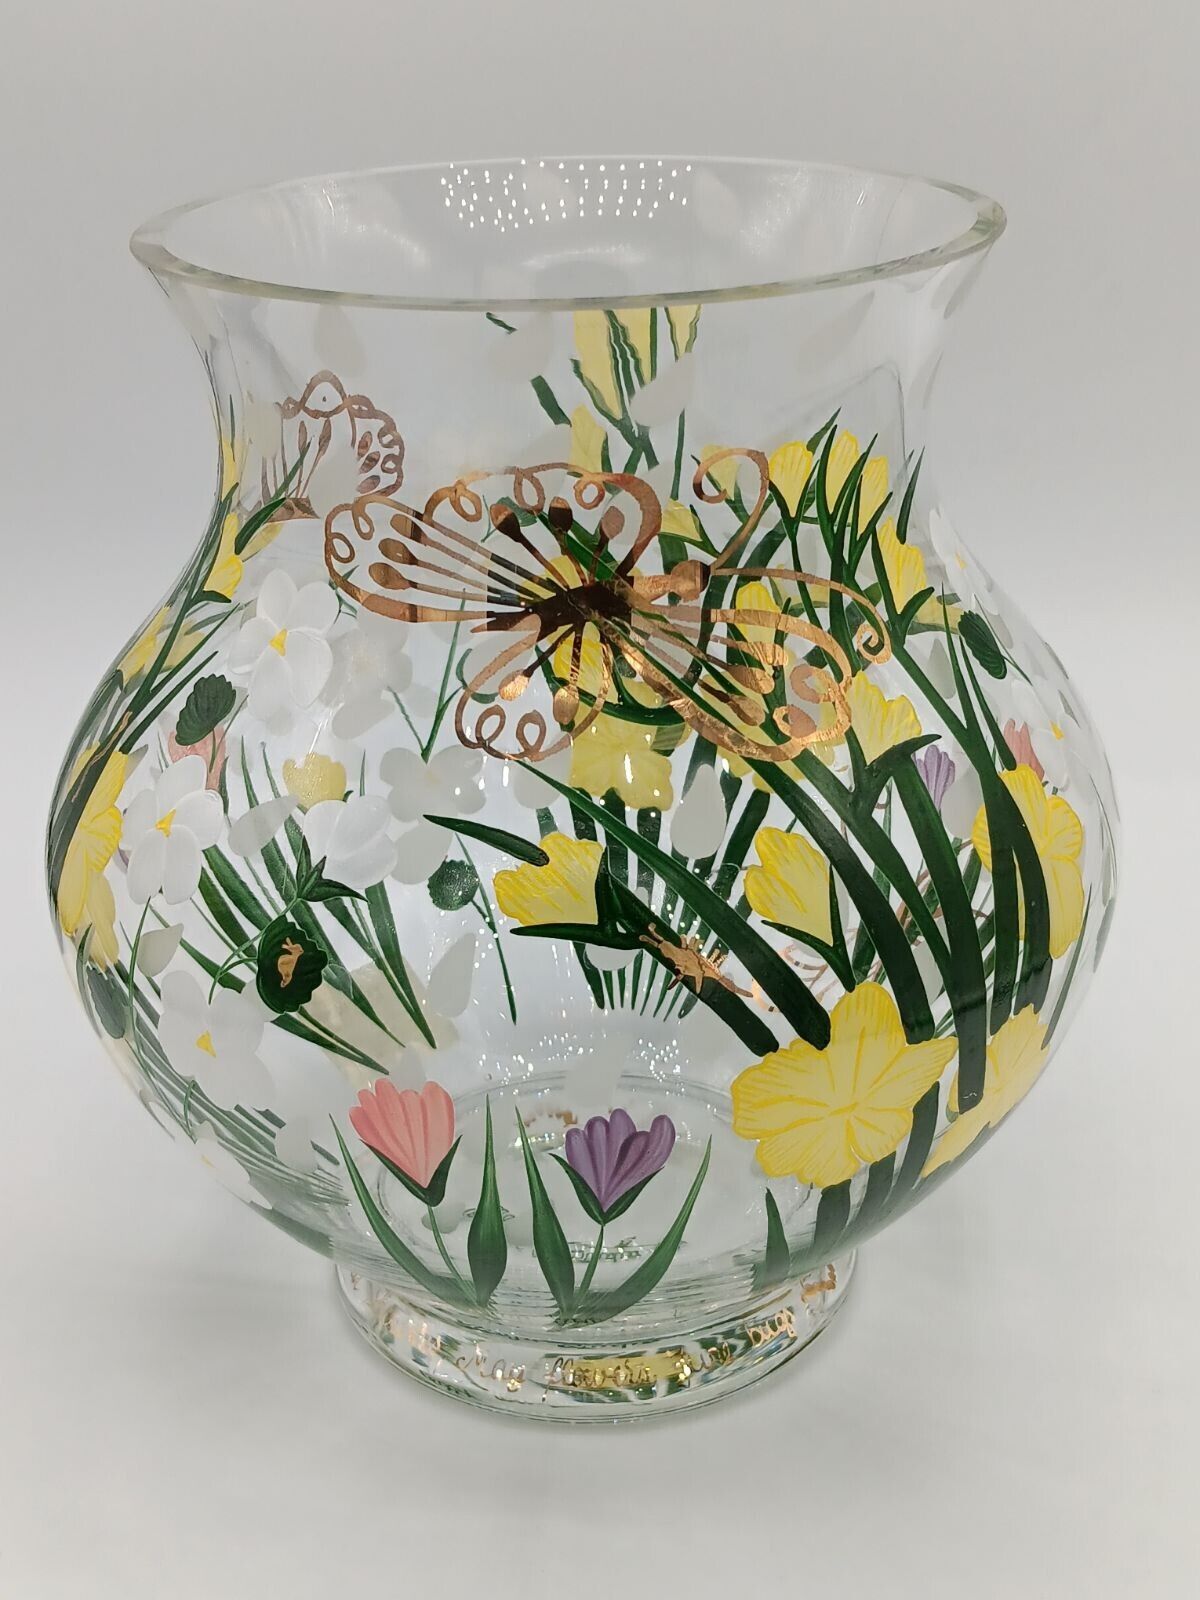 April Showers May Flowers June Bugs Vase by Peggy Walz Studio & Lenox Glass